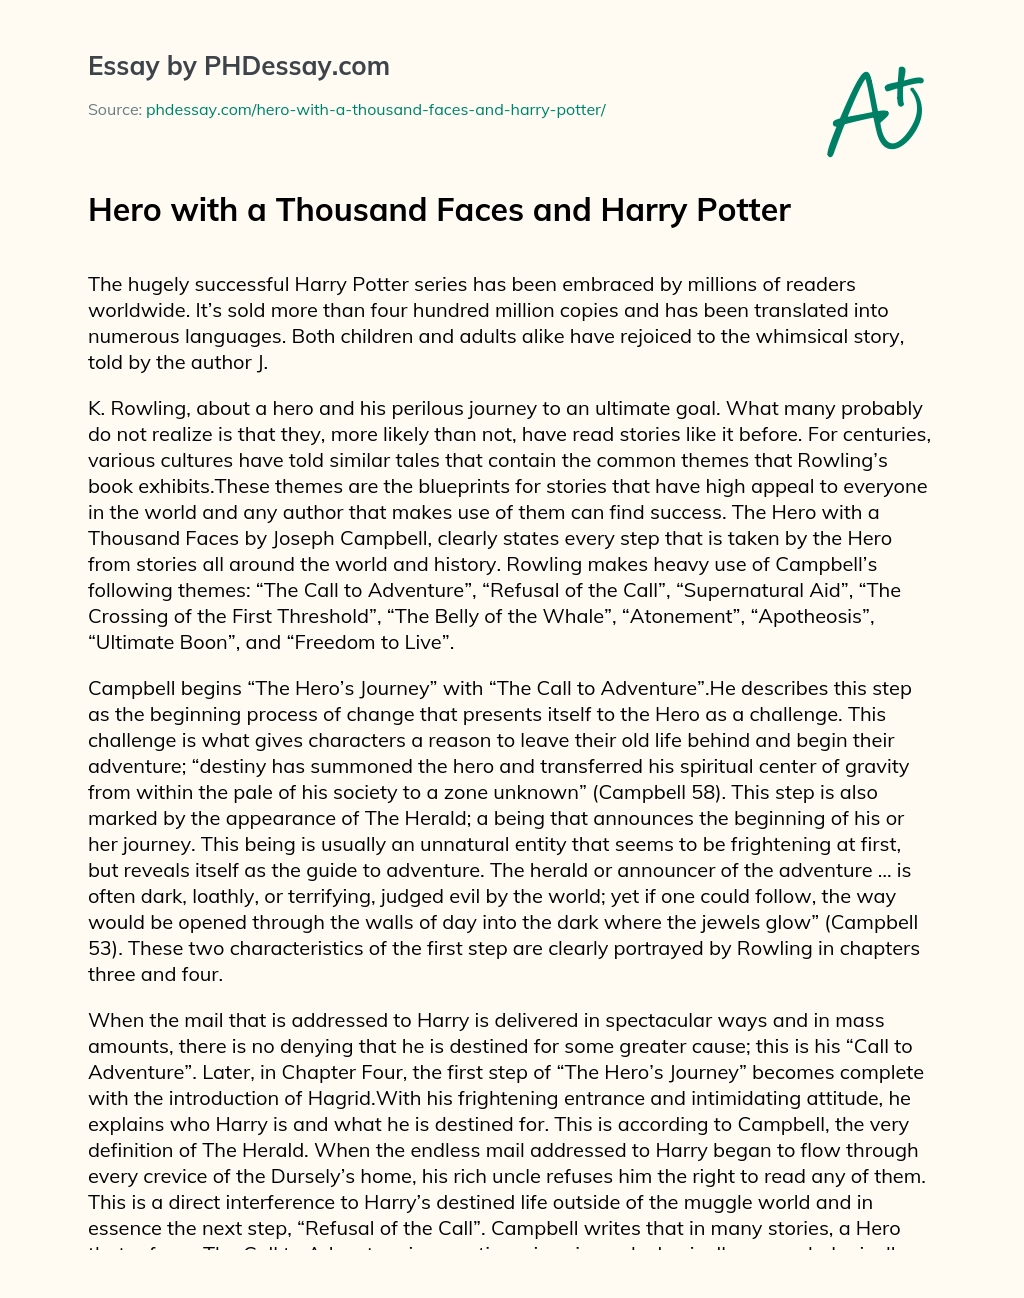 Hero with a Thousand Faces and Harry Potter essay